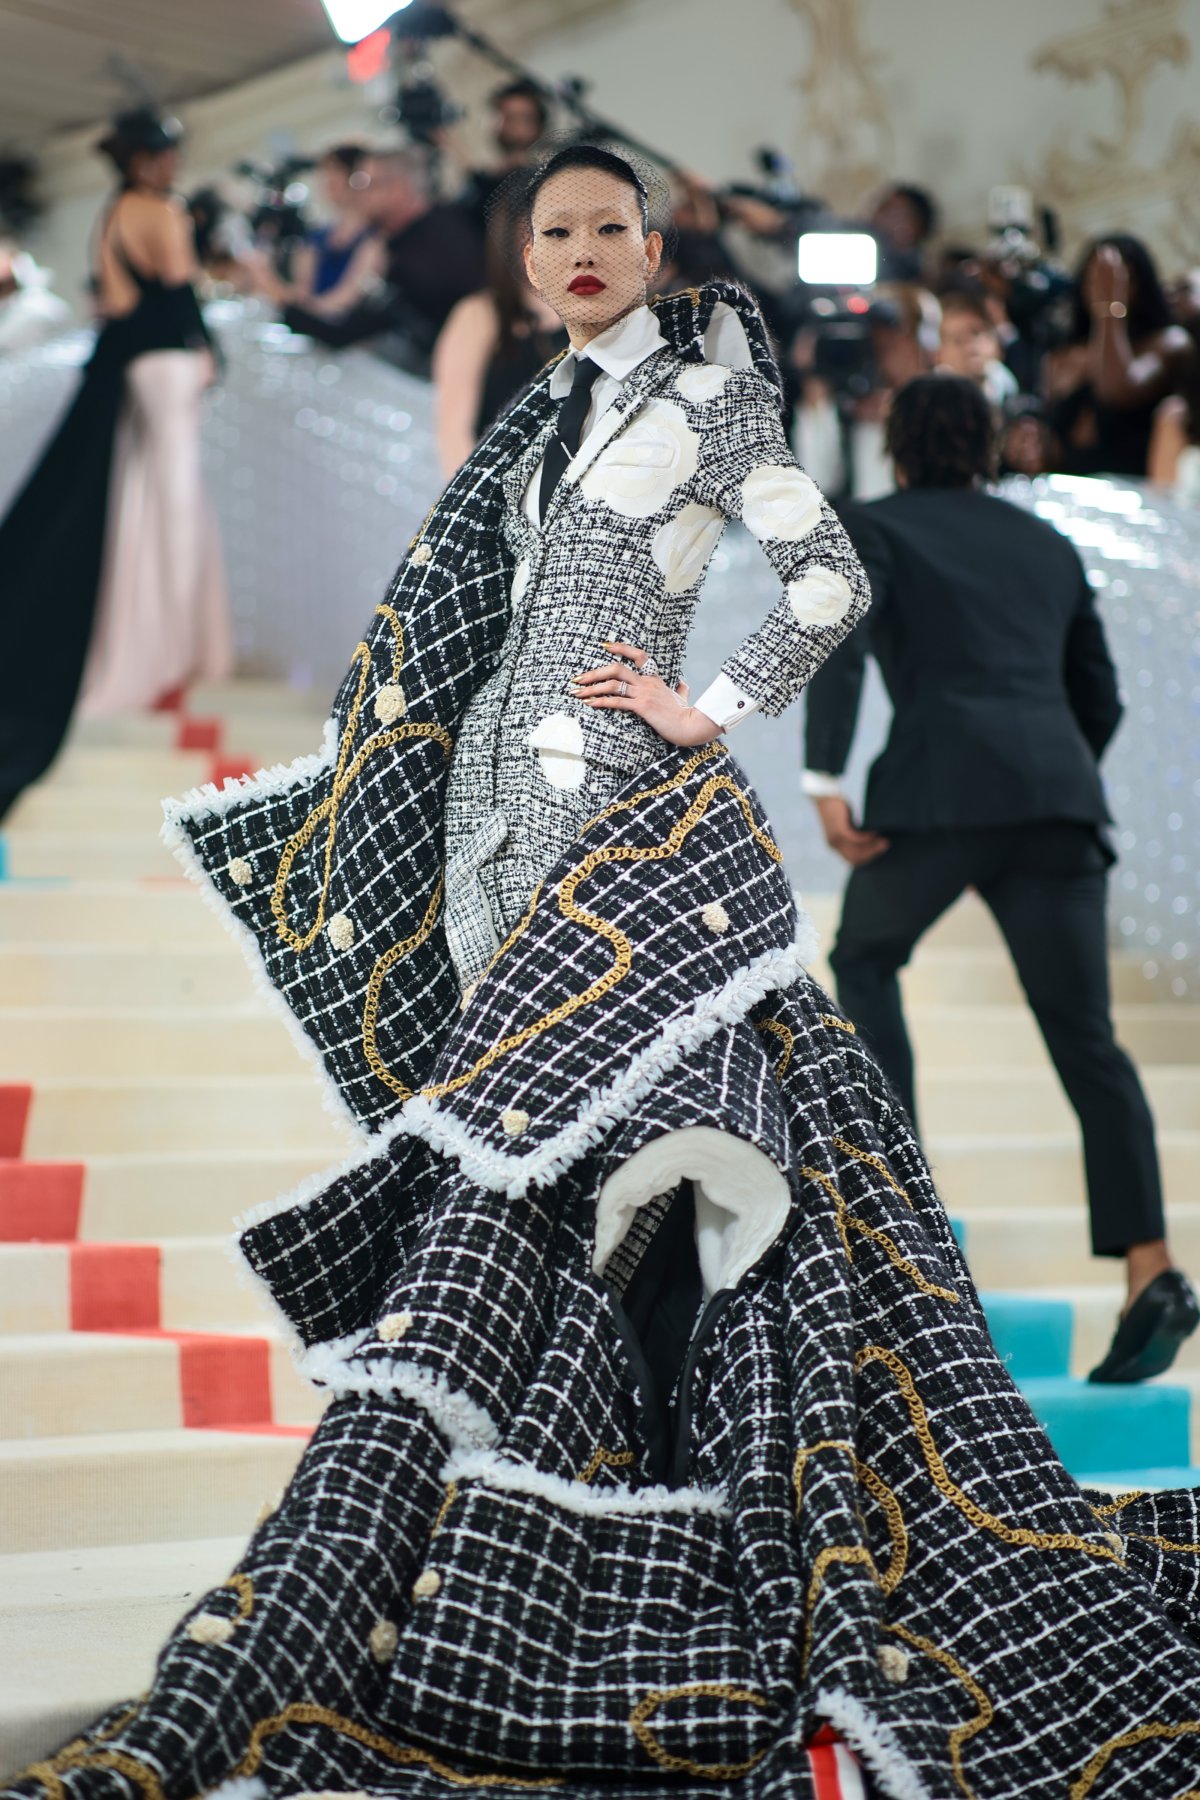 Sora Choi, a fashion model, walks on the runway during the Louis